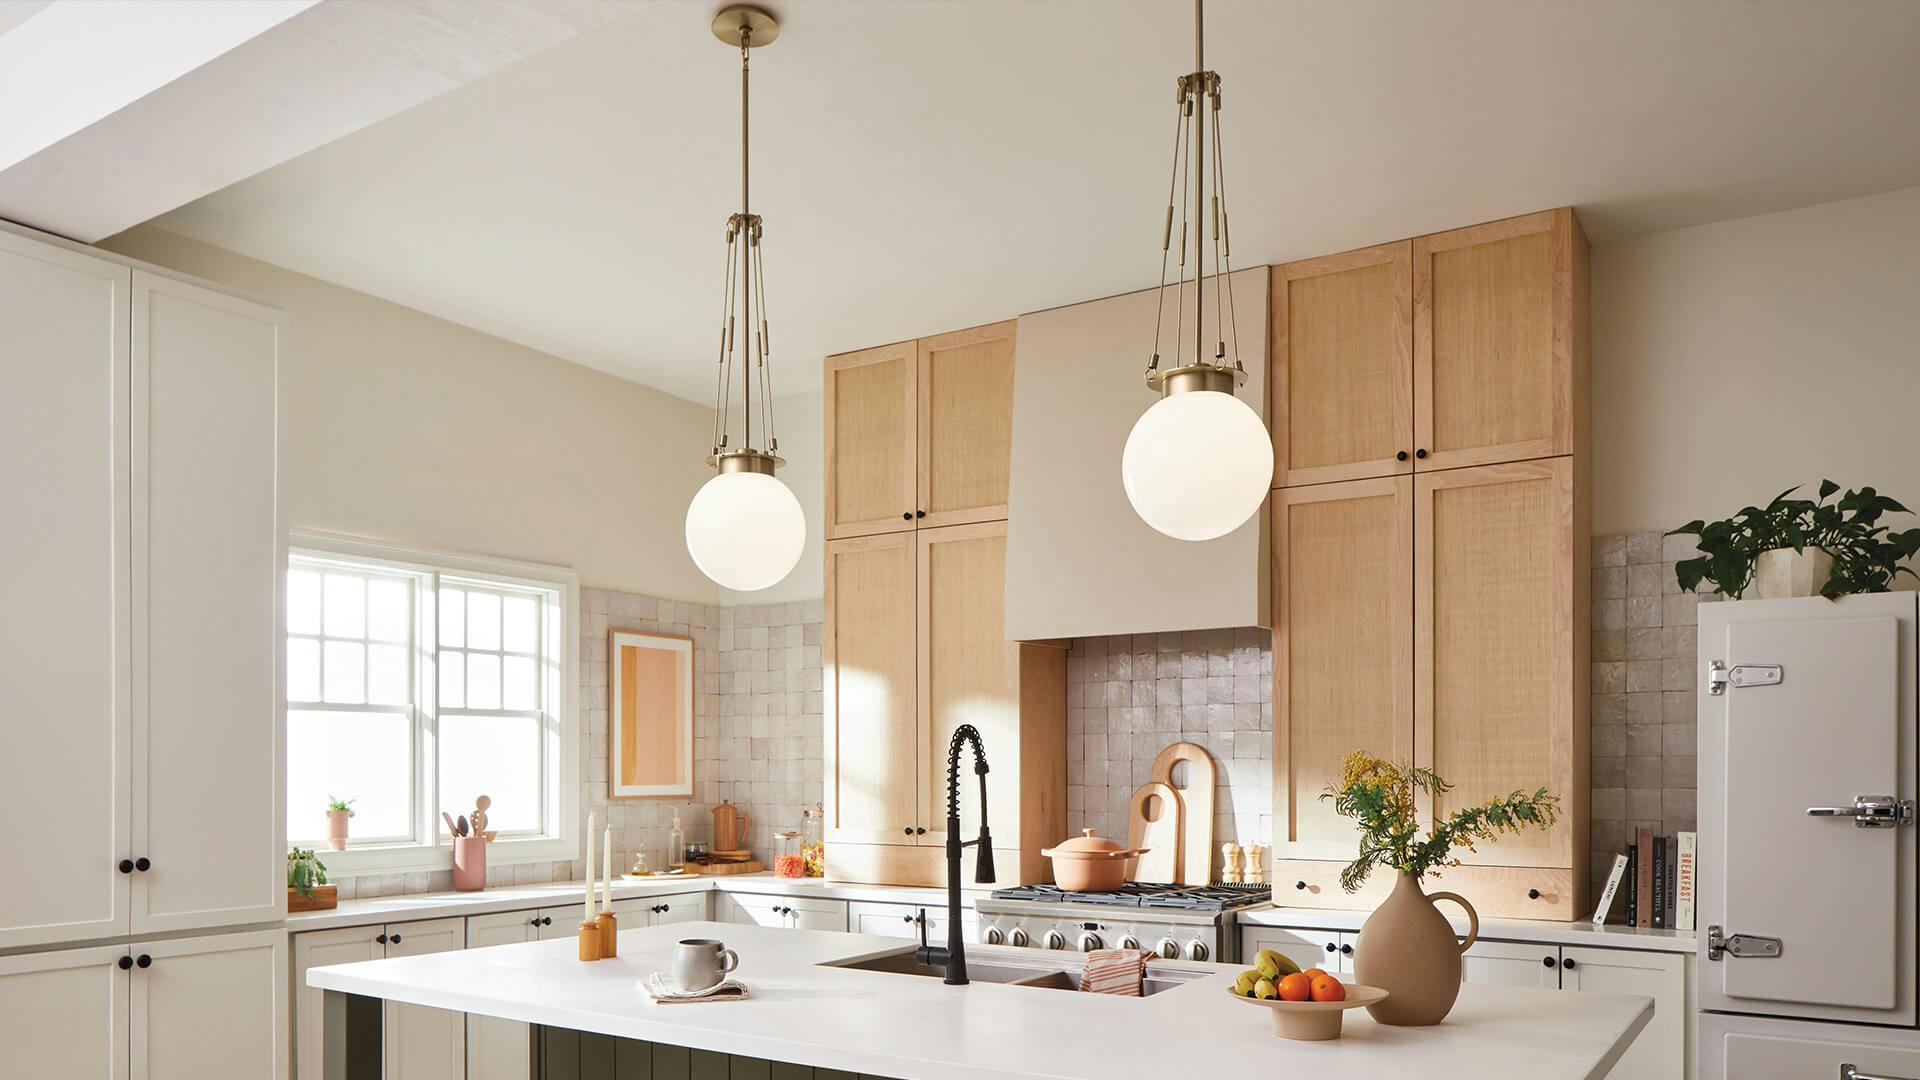 Two Albers pendants hanging above a kitchen island in champagne bronze finish